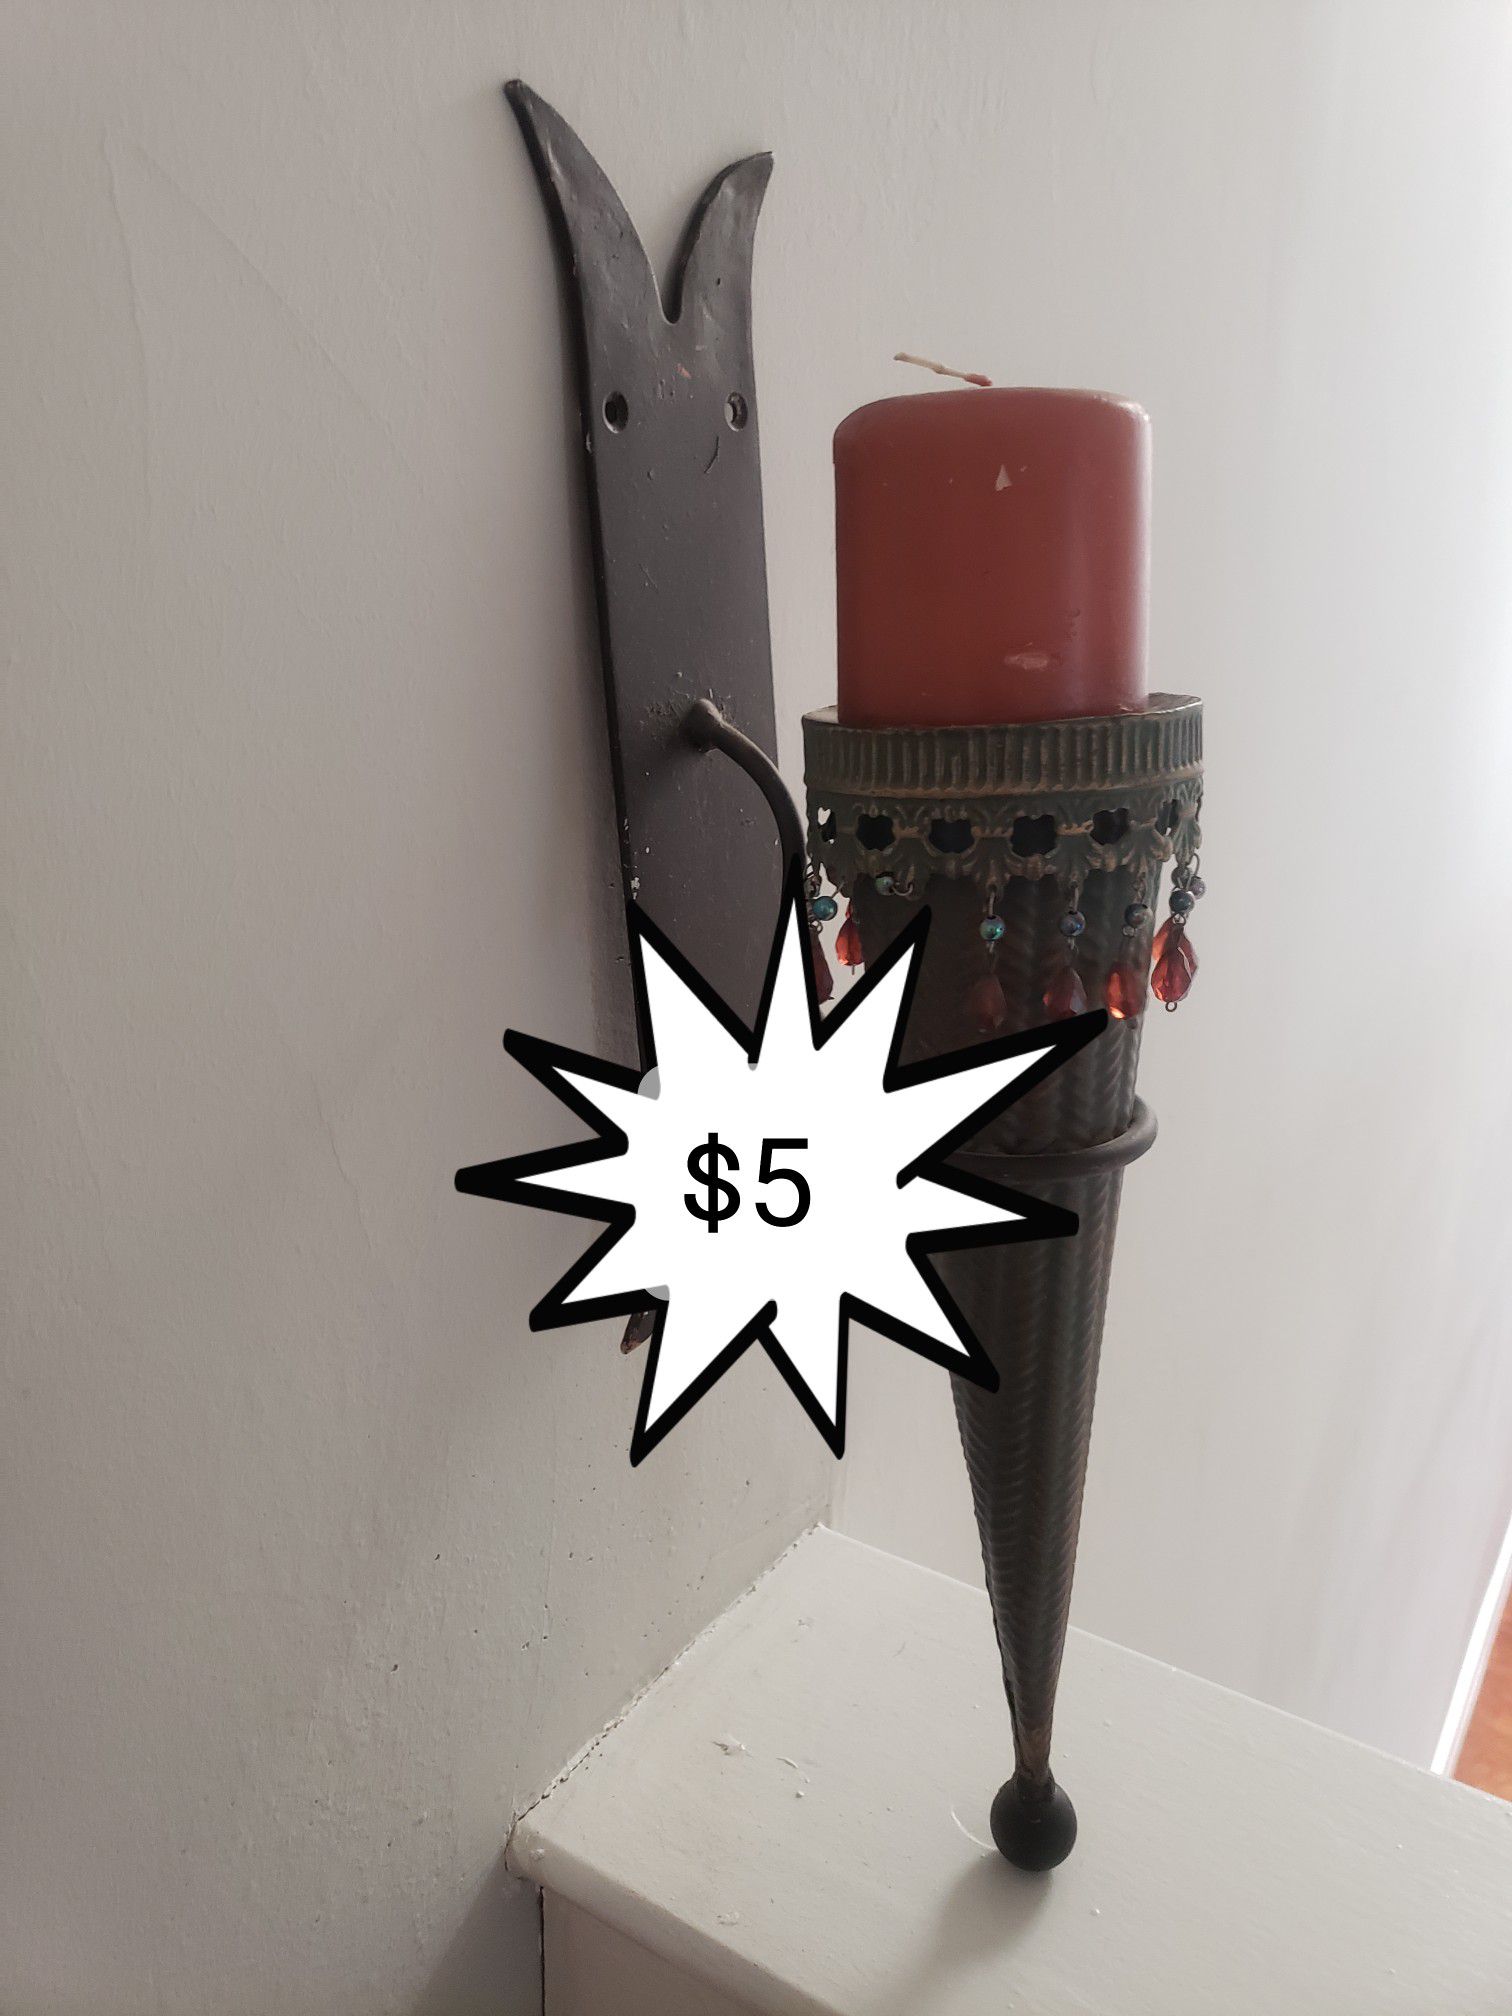 Wall candle sconce $5